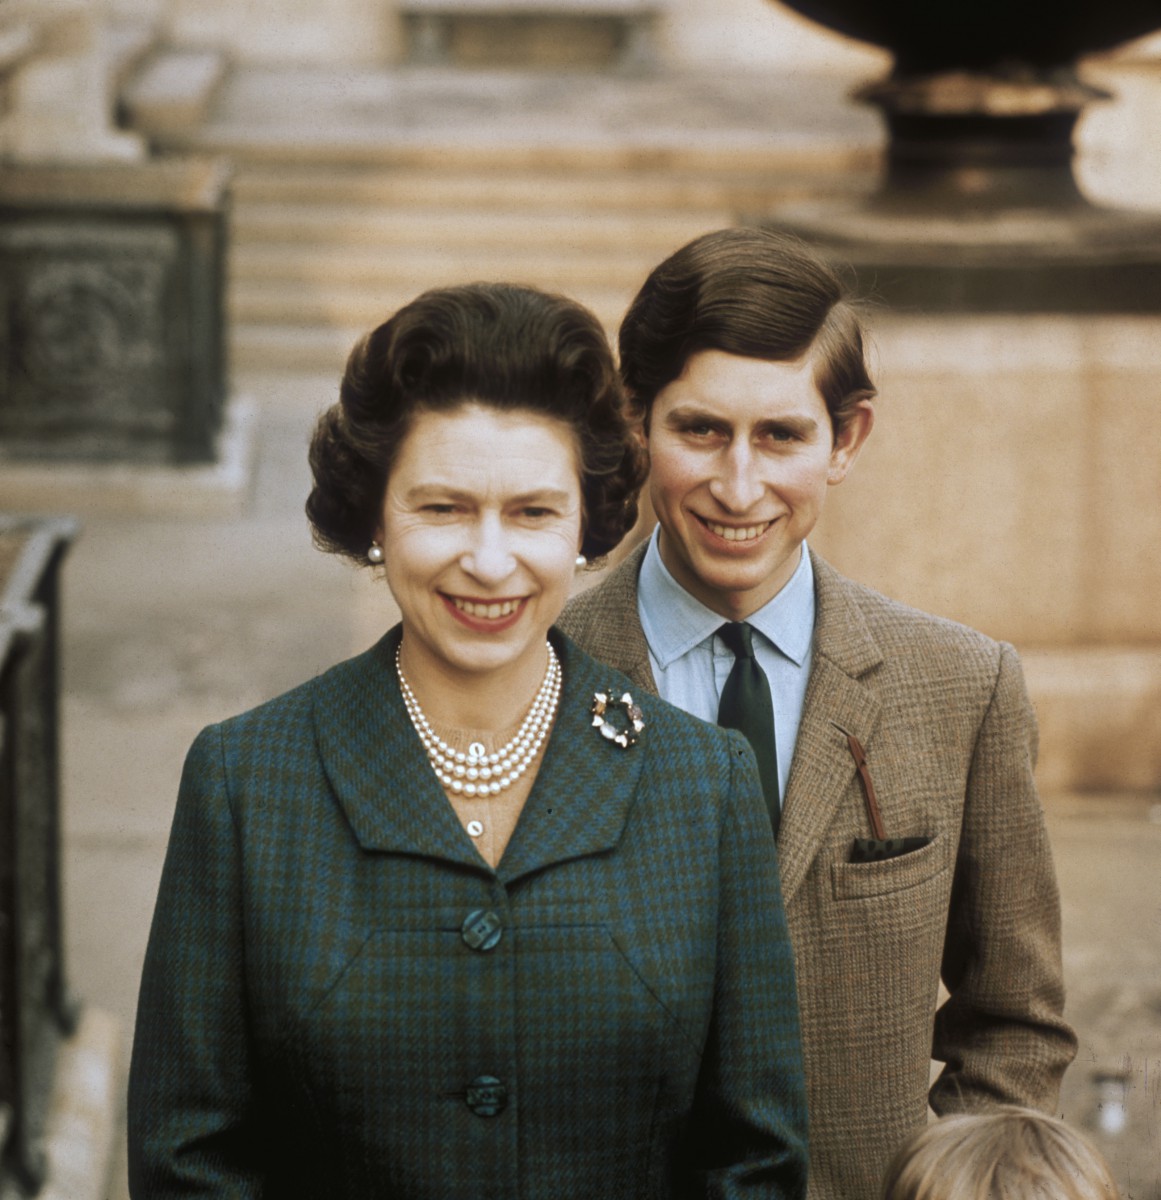 This is Prince Charles when he was 21 in 1969 with the Queen